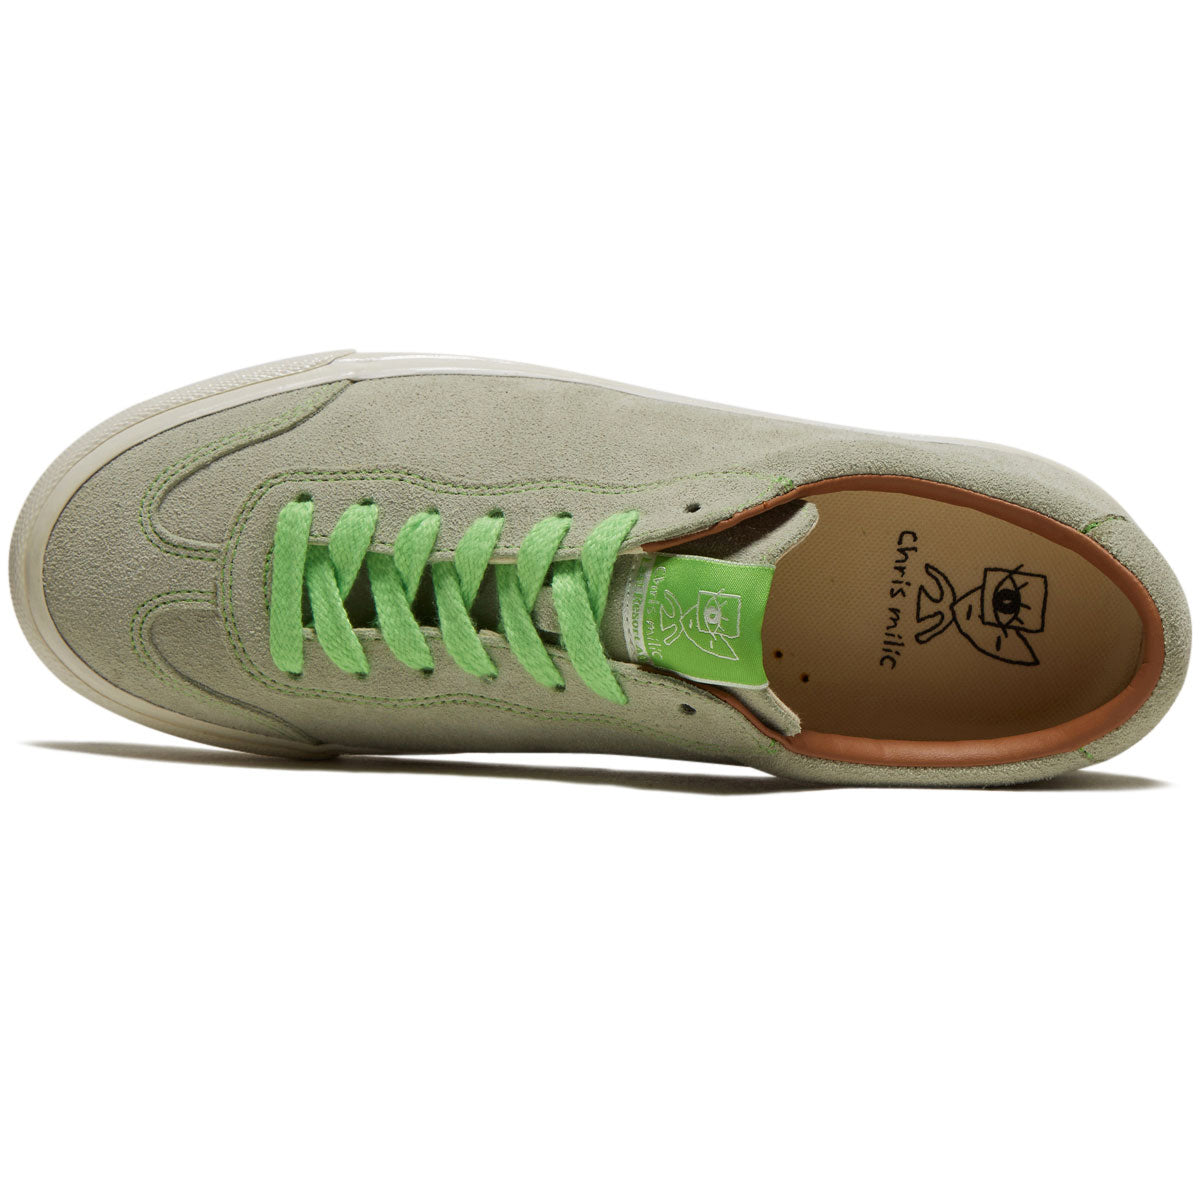 Last Resort AB VM004 Milic Suede Shoes - Green Tint/White image 3